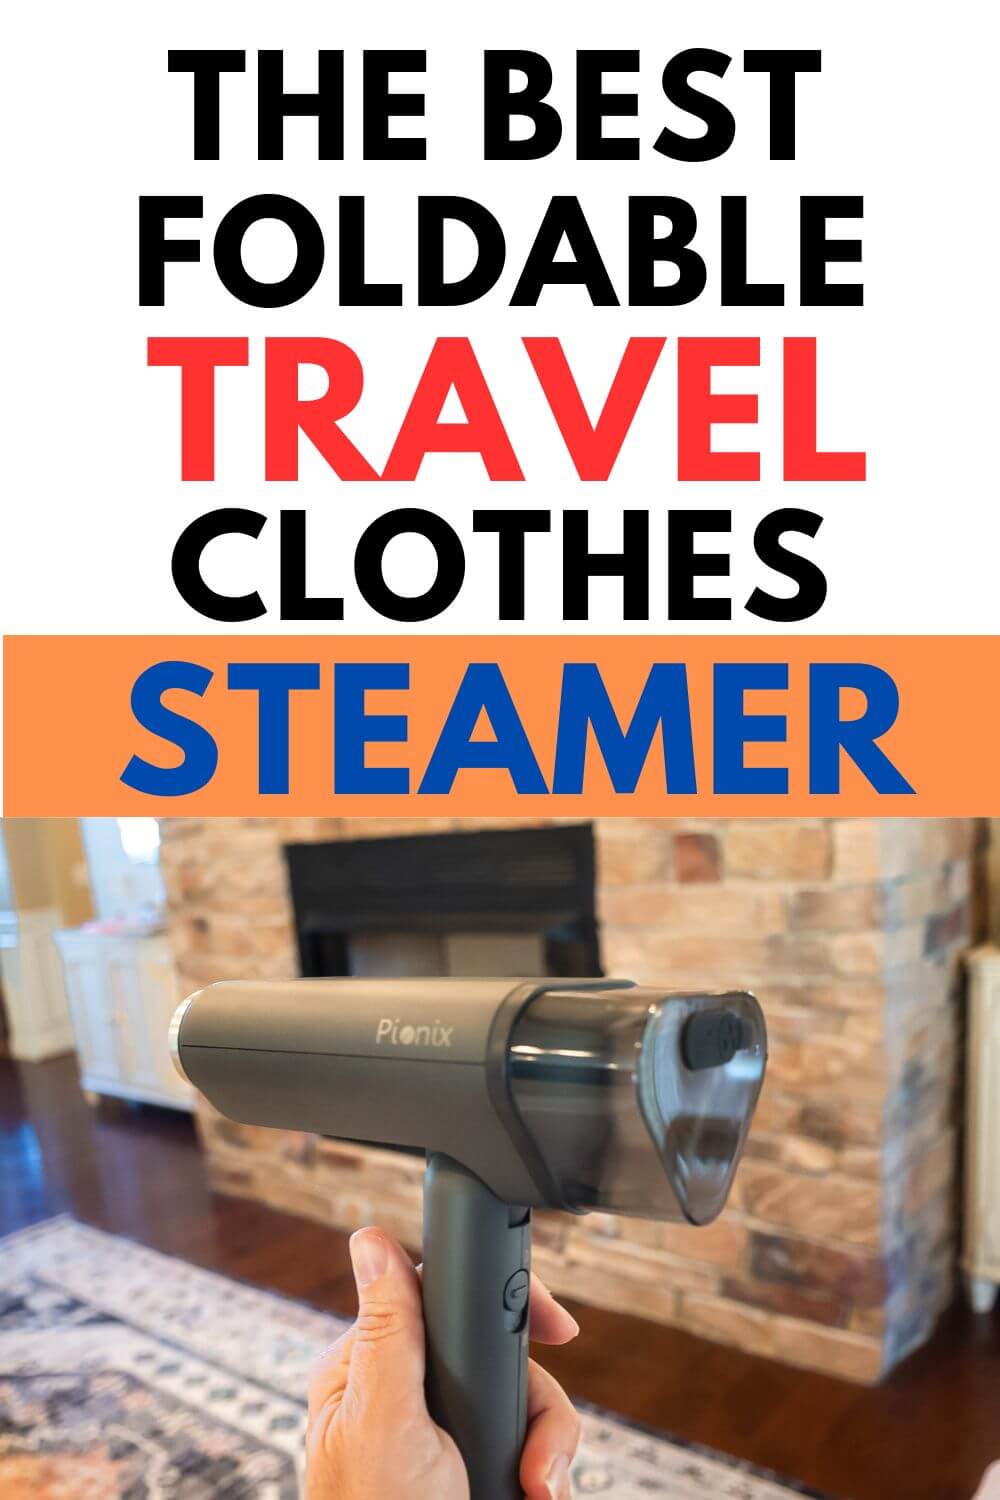 Pionix Travel Clothes Steamer Review Amazon Finds